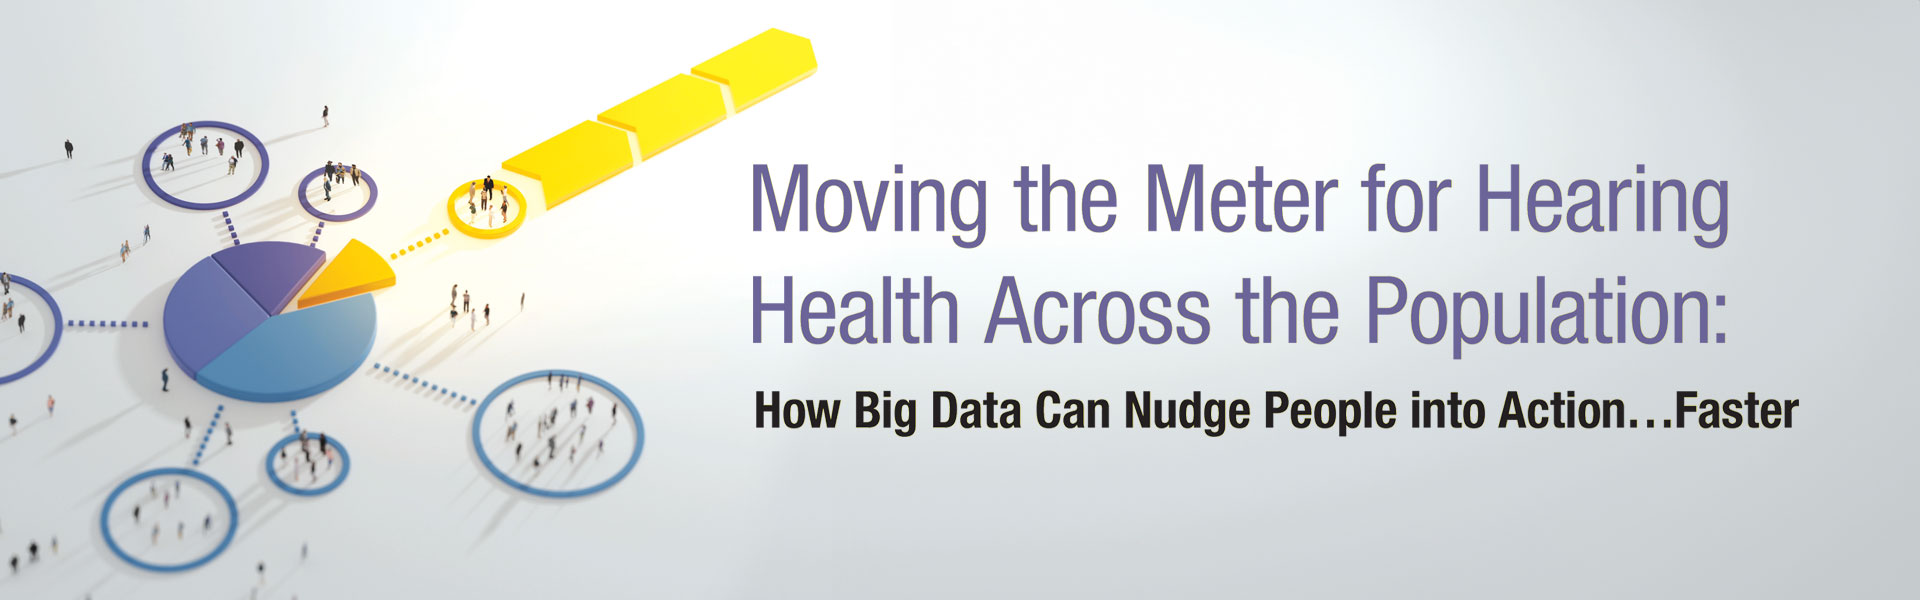 Moving the Meter for Hearing Health Across the Population: How Big Data Can Nudge People into Action…Faster